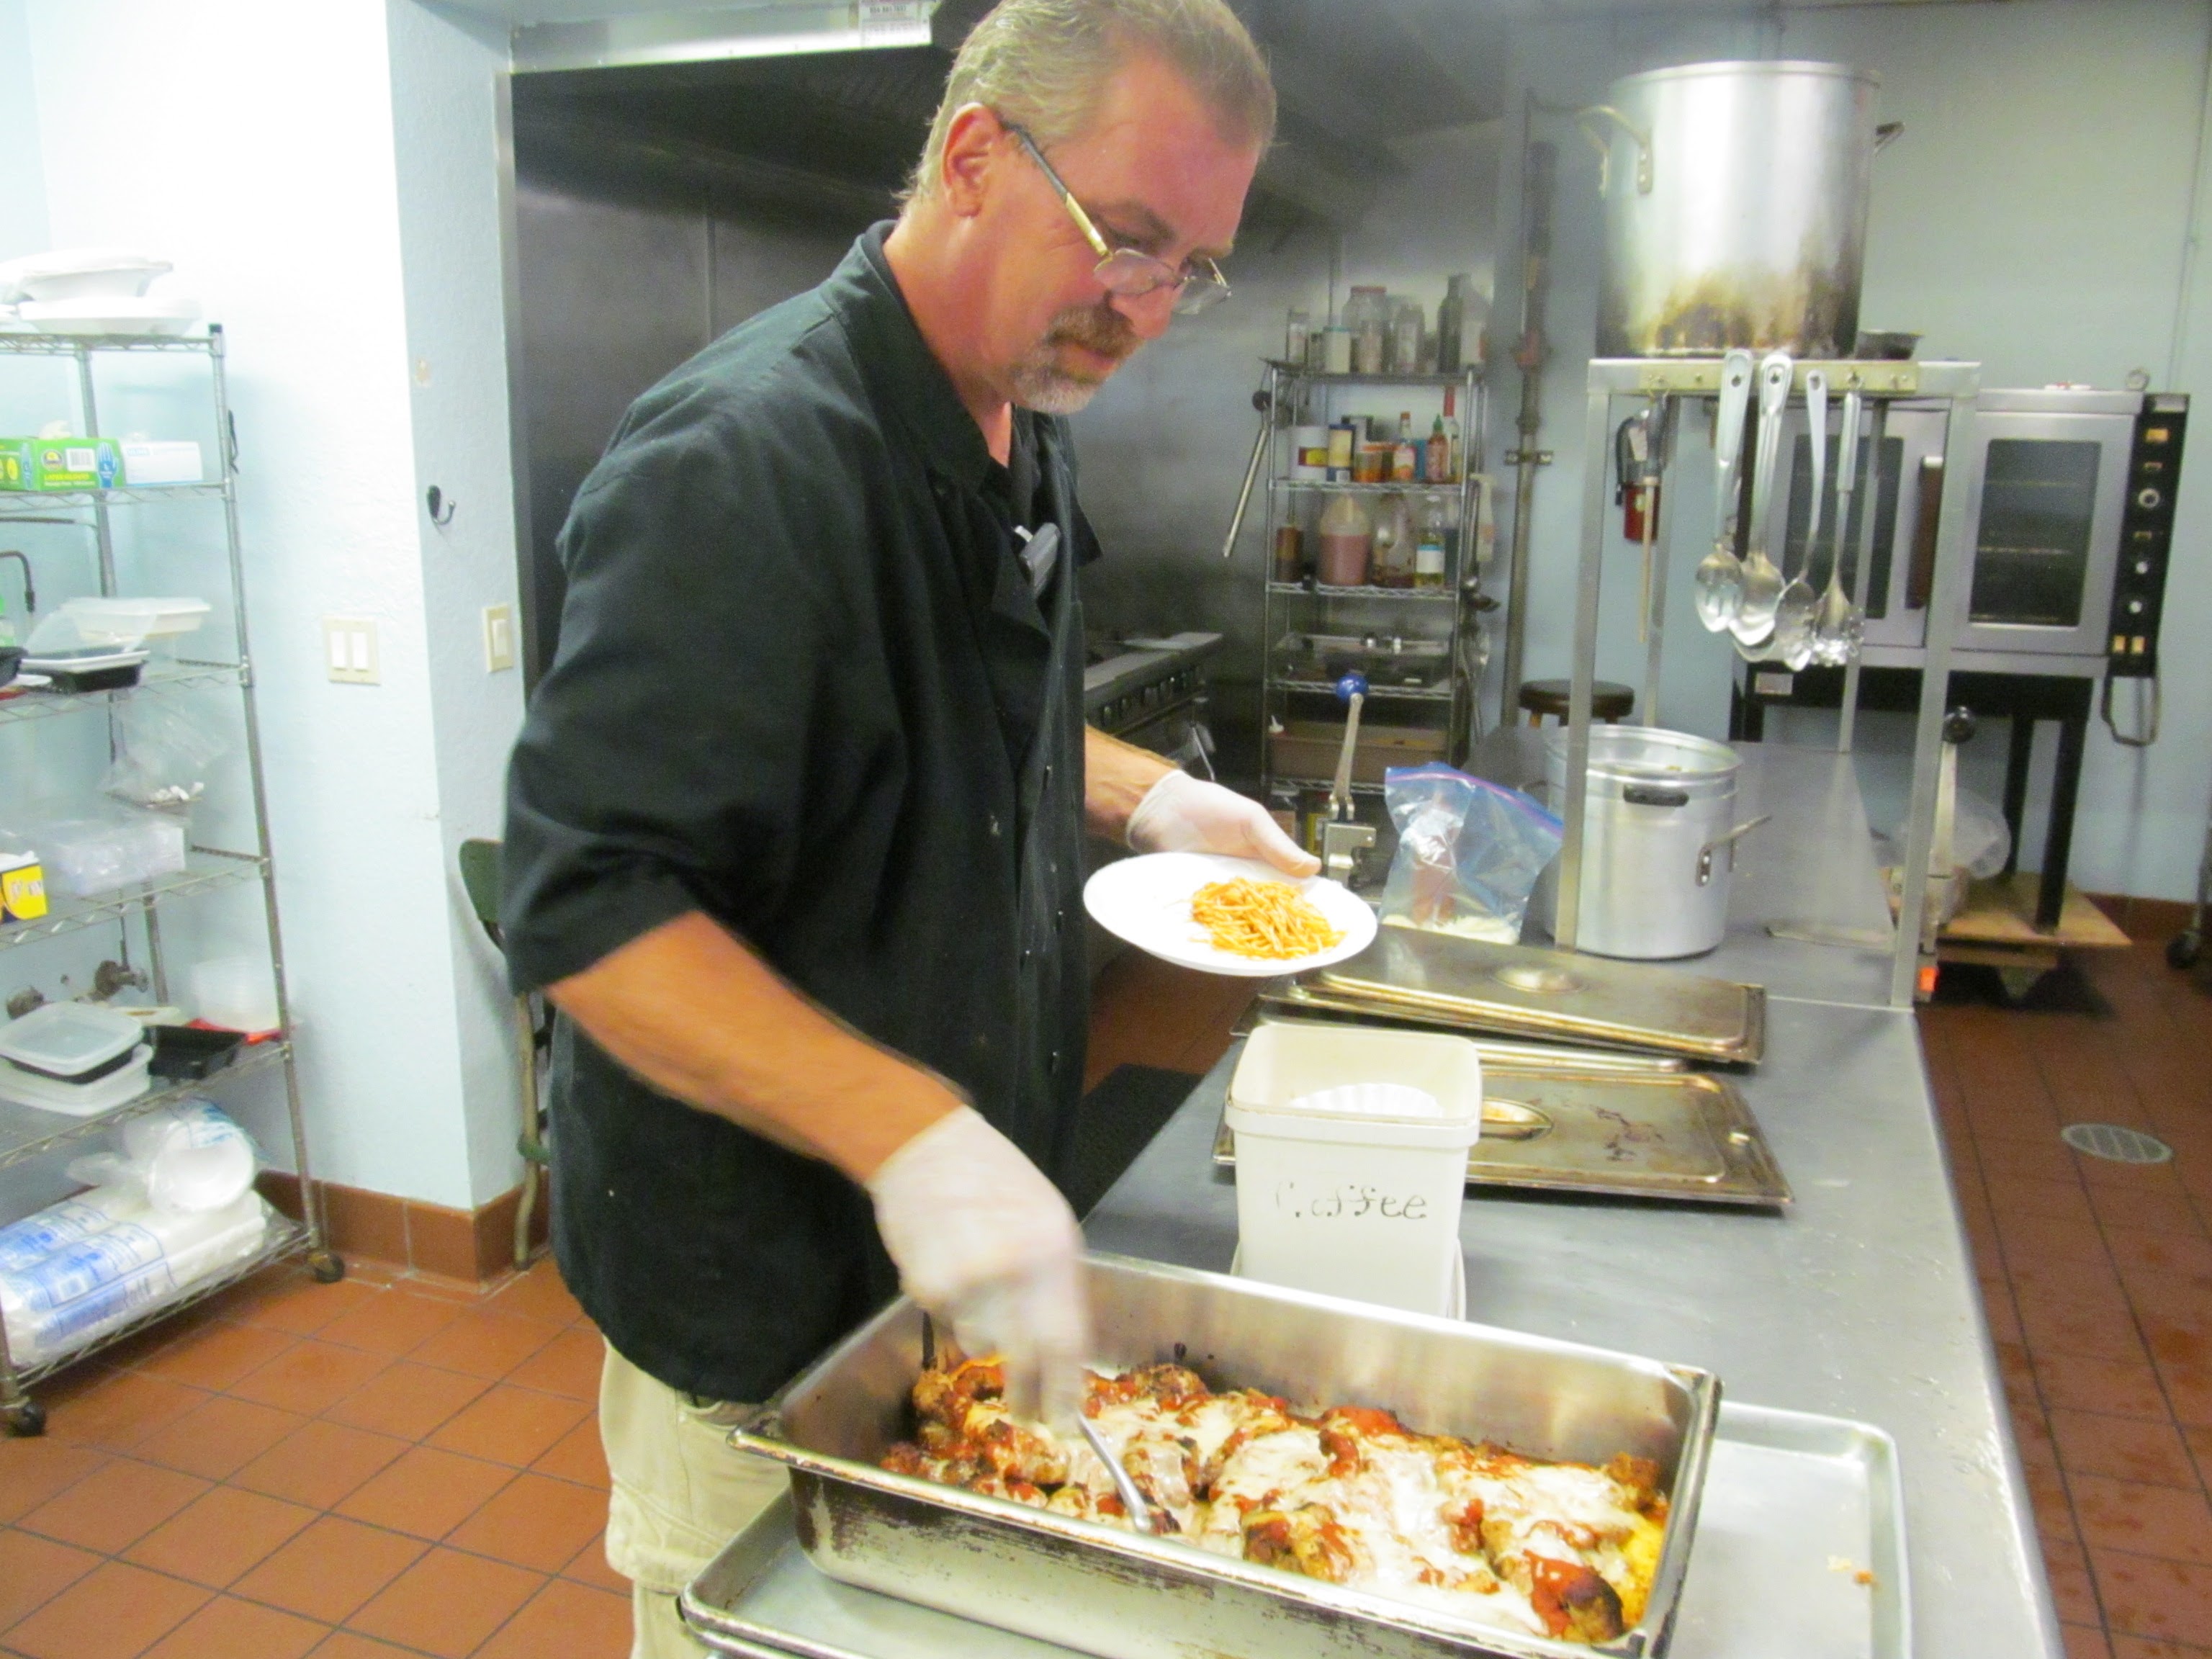 Soup kitchen volunteer chef prepares food f.or the homeless people